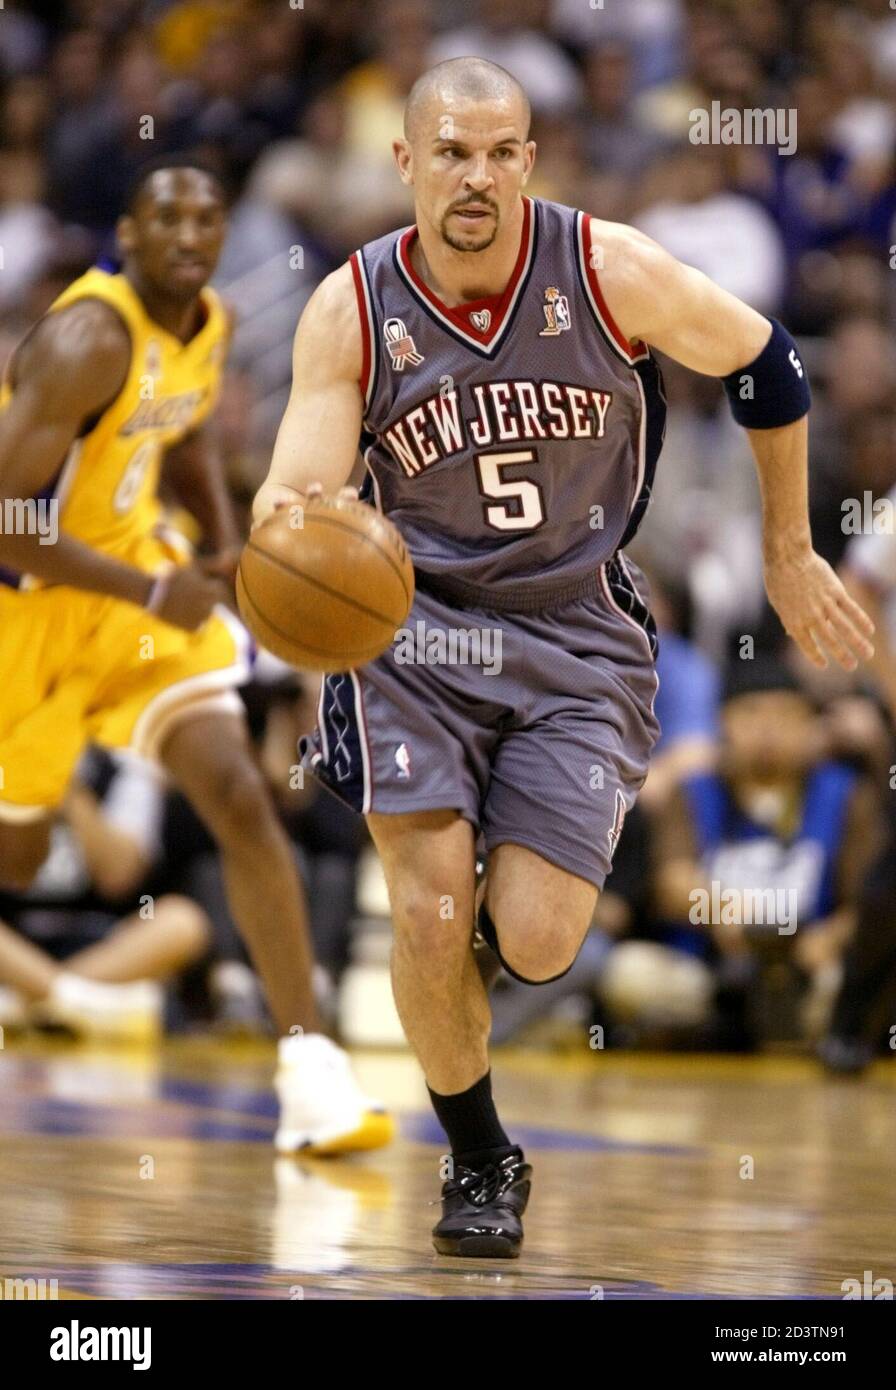 New Jersey Nets' Jason Kidd brings the ball up the floor against the Los  Angeles Lakers during Game 2 of the NBA Finals June 7, 2002 in Los Angeles.  Trailing the play